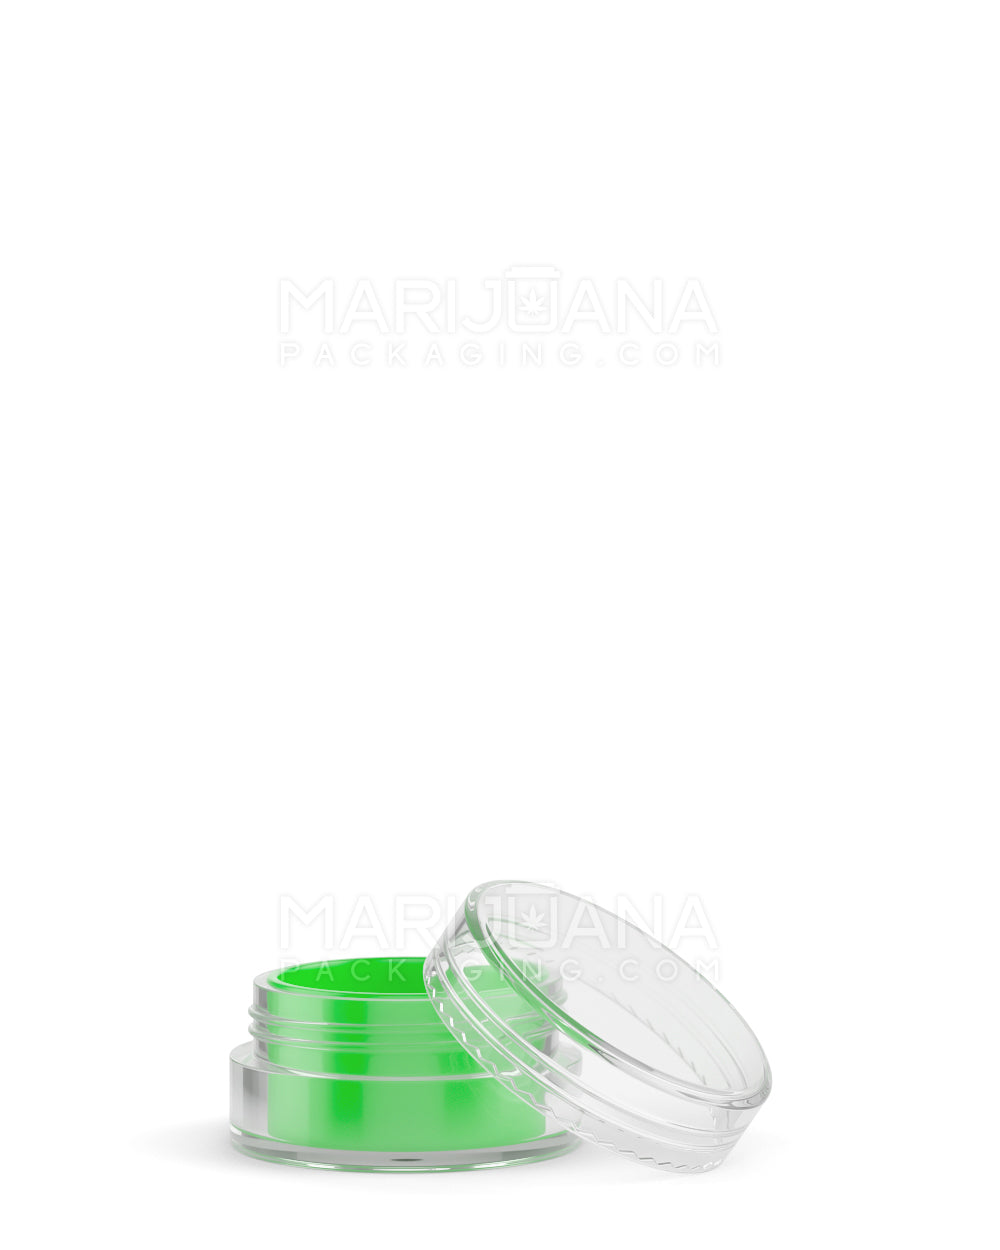 Clear Concentrate Containers w/ Screw Top Cap & Green Silicone Insert | 5mL - Plastic | Sample - 1